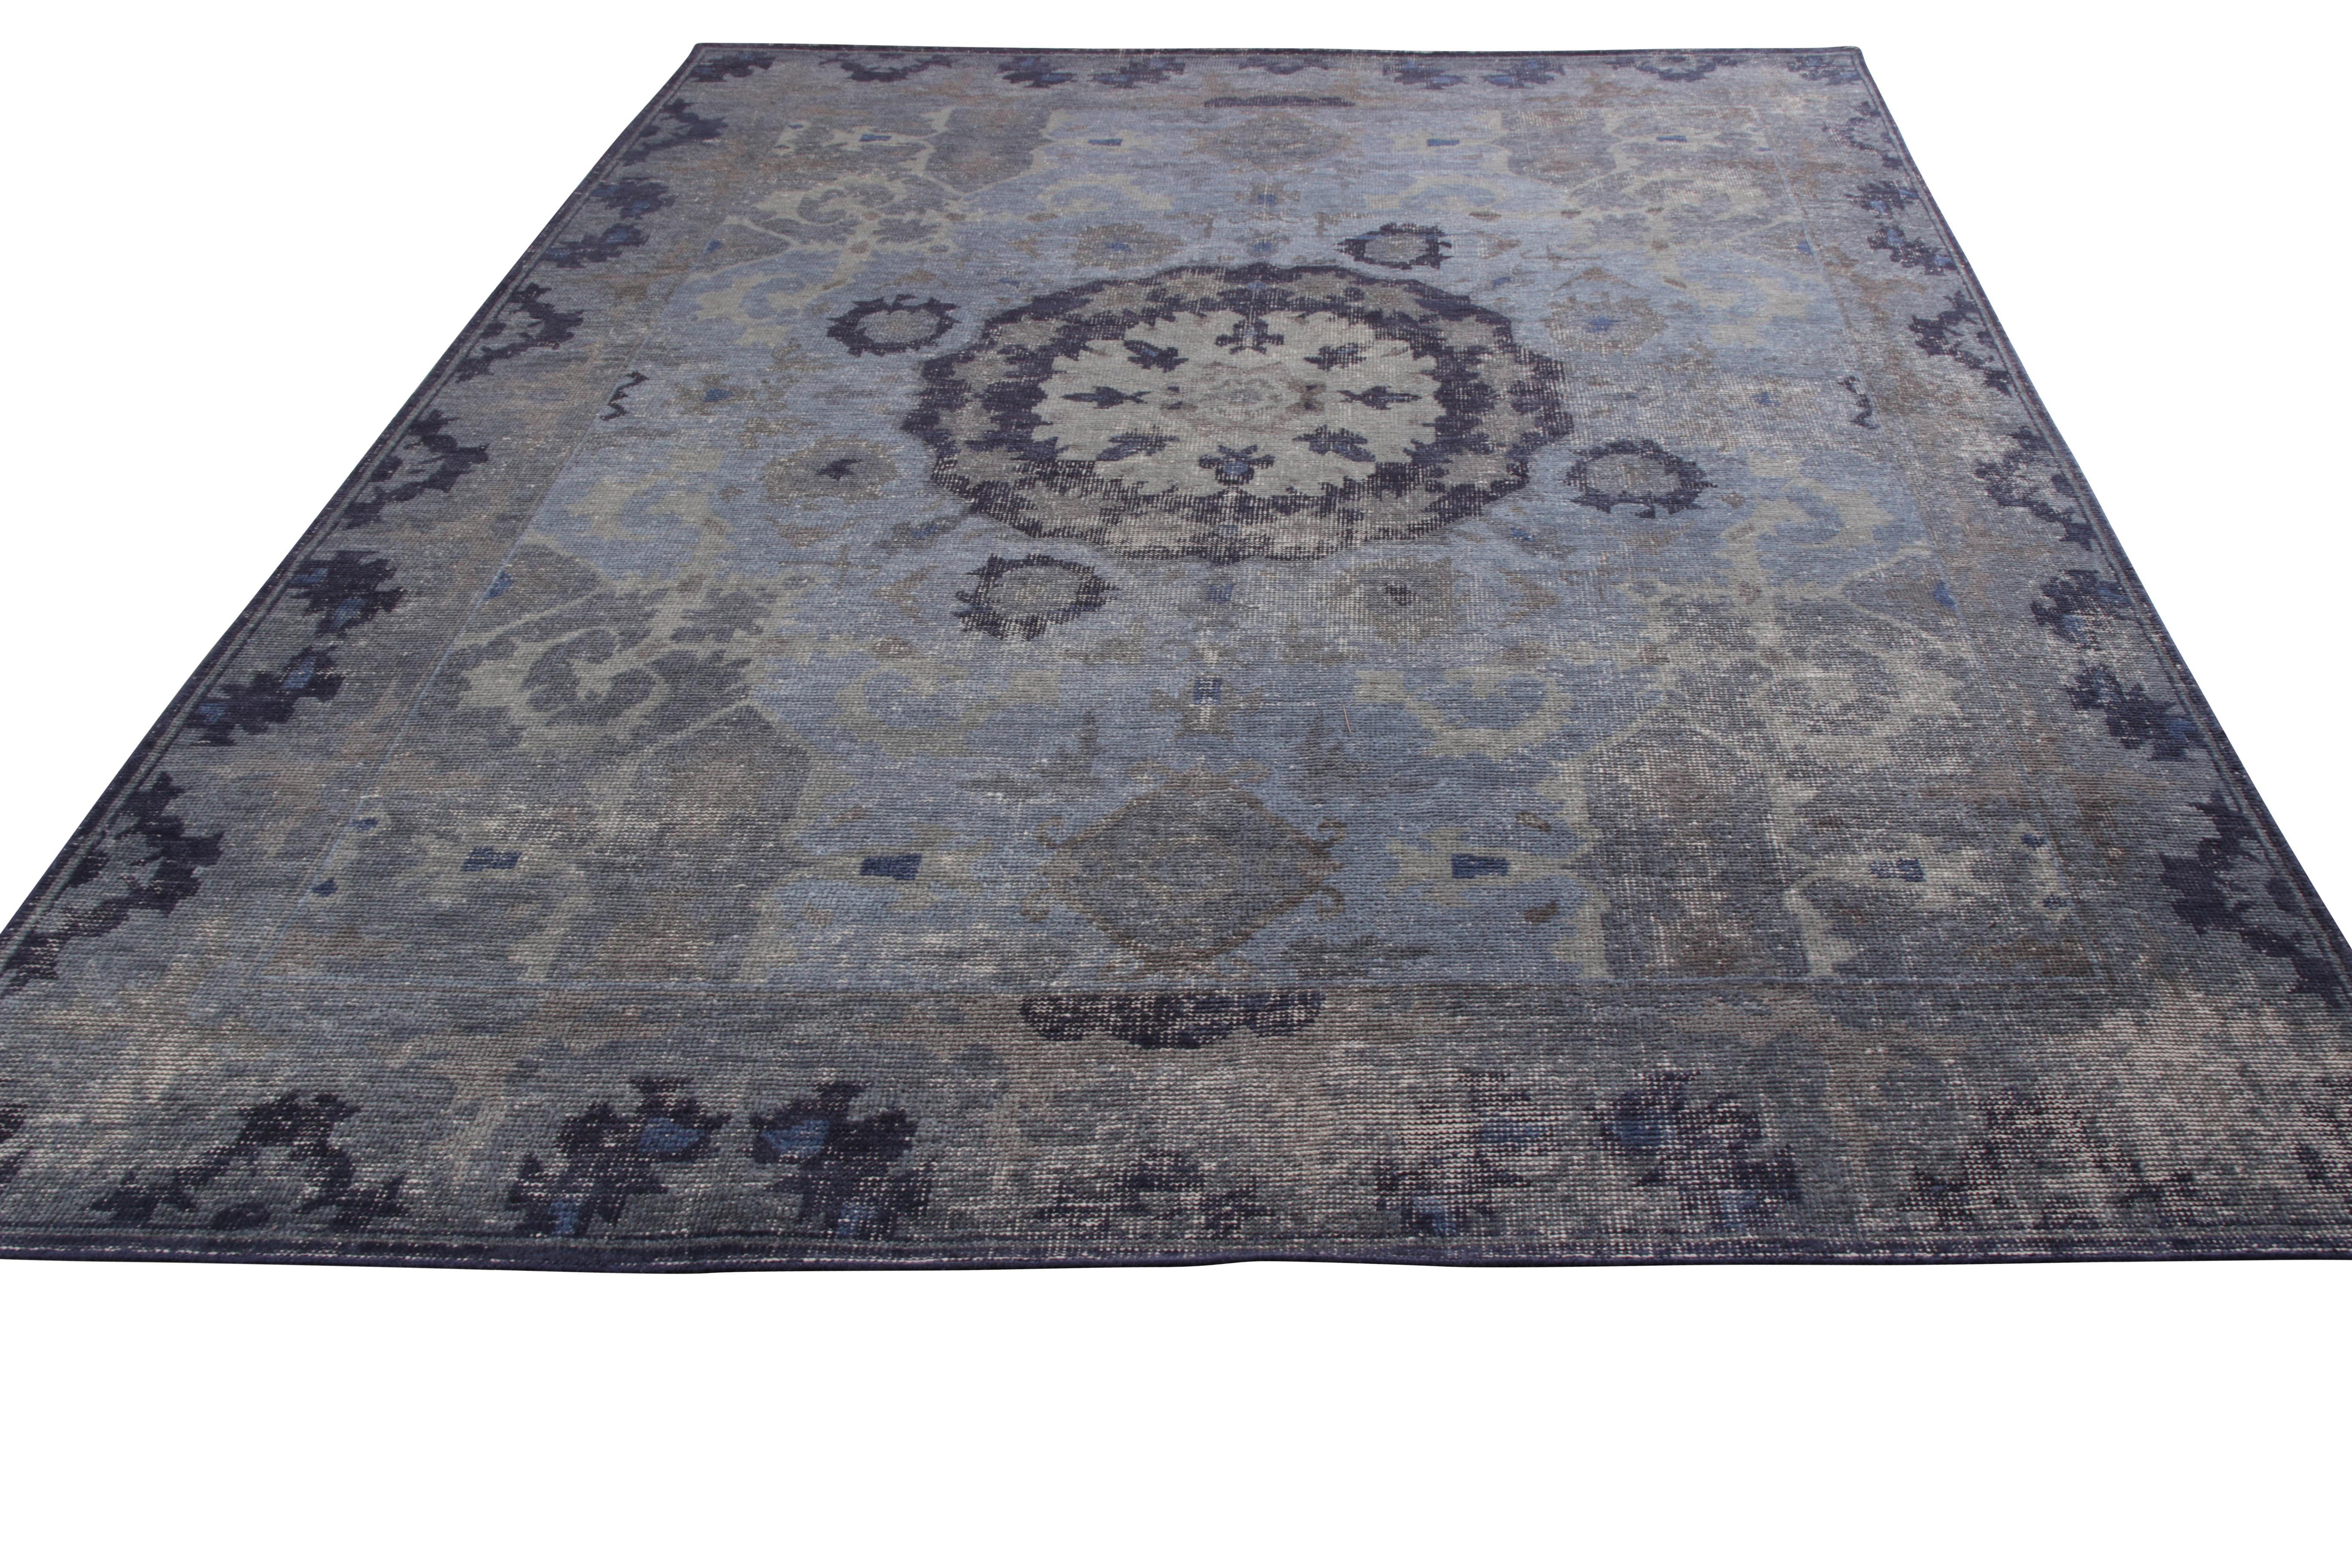 Hand knotted in wool, an 8 x 10 ode to classic rug styles in Rug & Kilim’s Homage Collection. Enjoying sophisticated blue and gray colors in medallion and floral patterns with a distressed aesthetic unique to this collection. 

Further on the